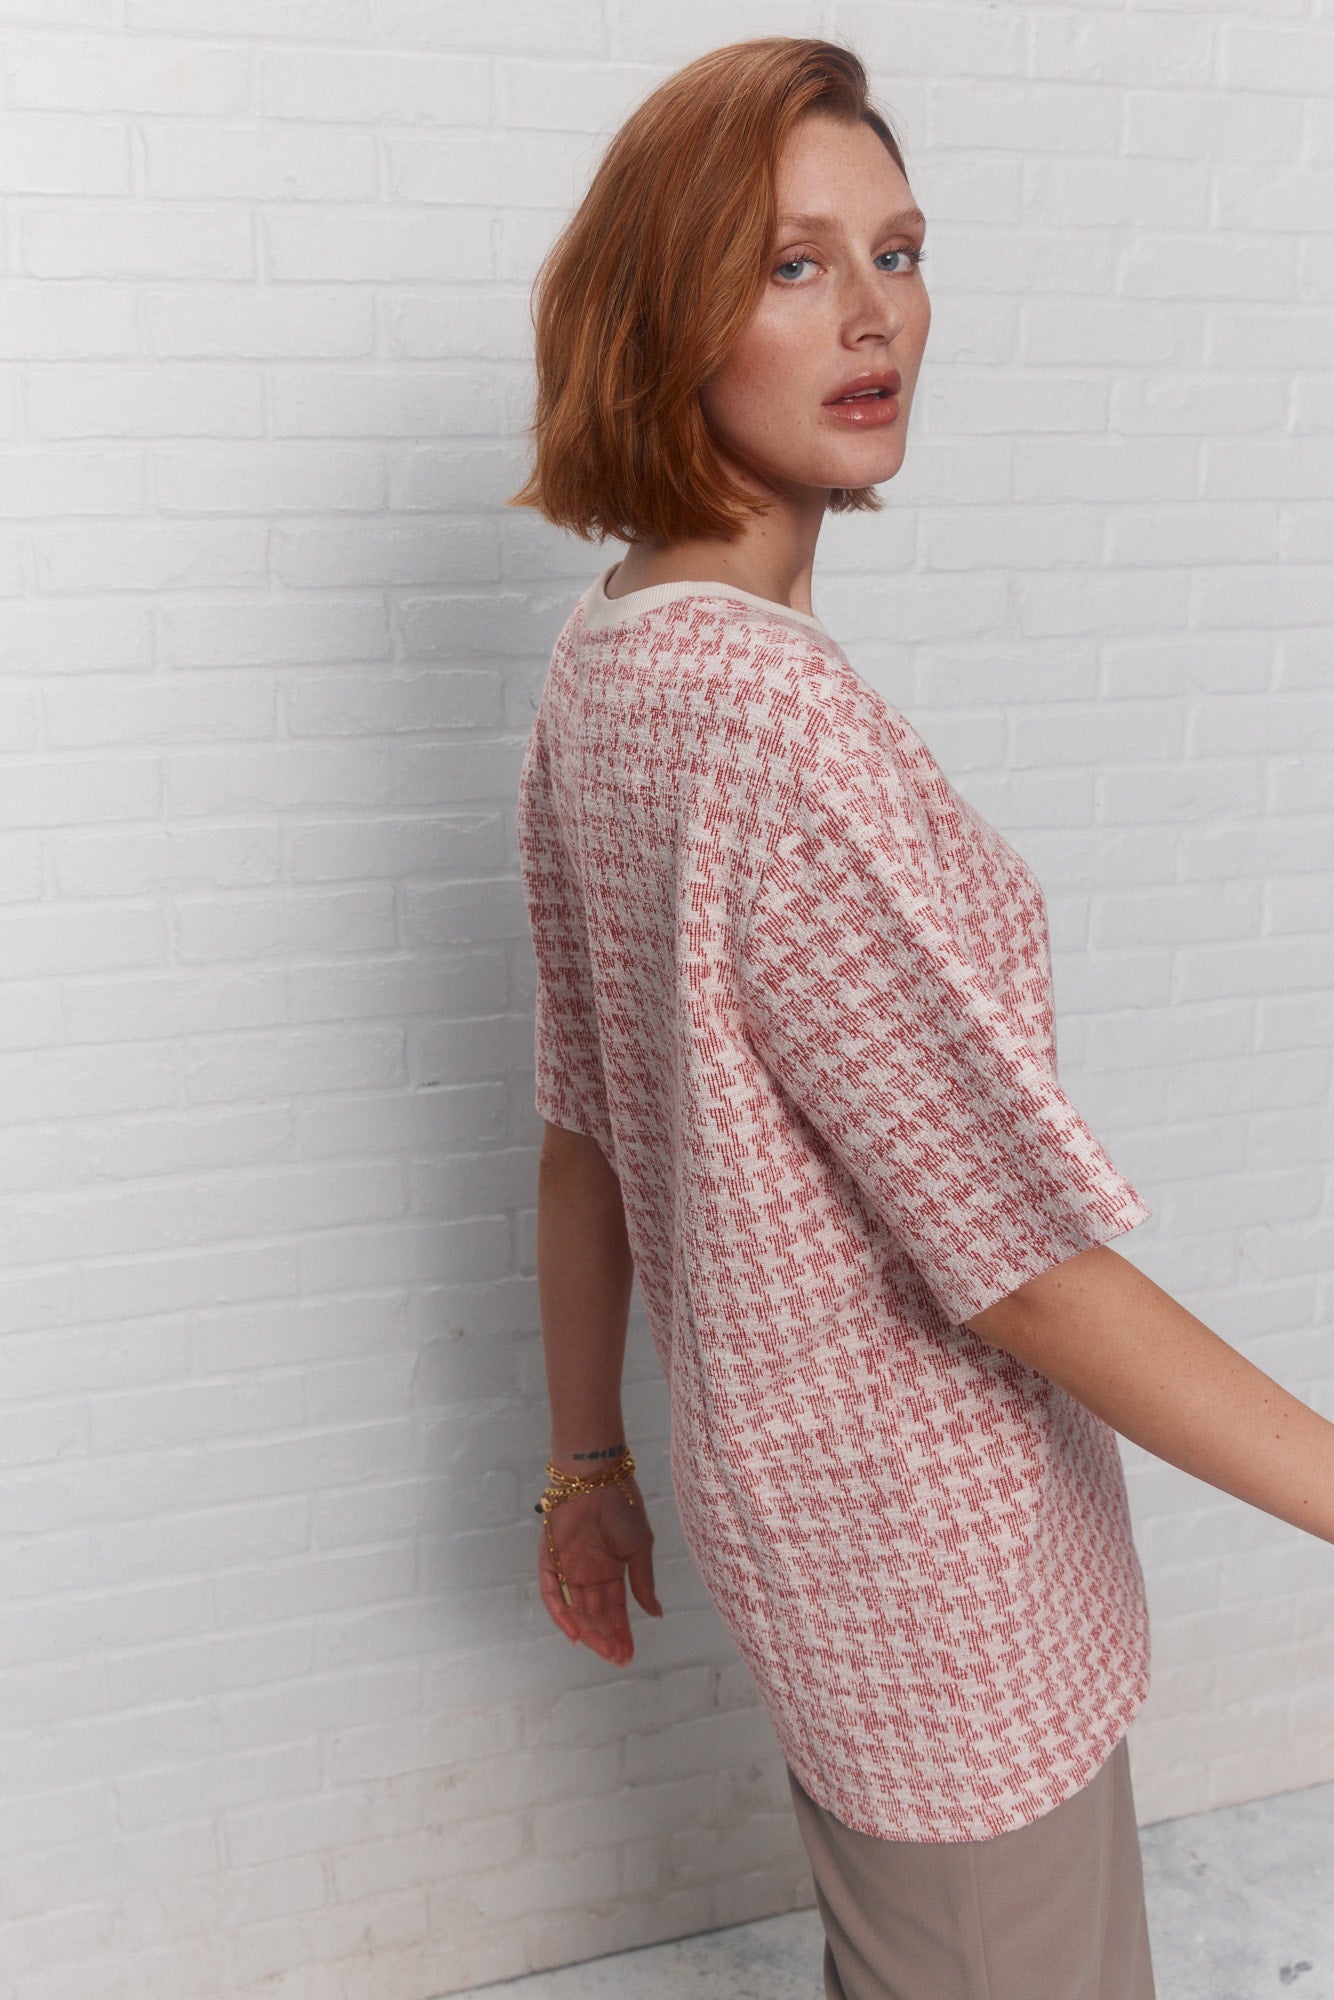 Loose-fitting red houndstooth pattern t-shirt | Karalie